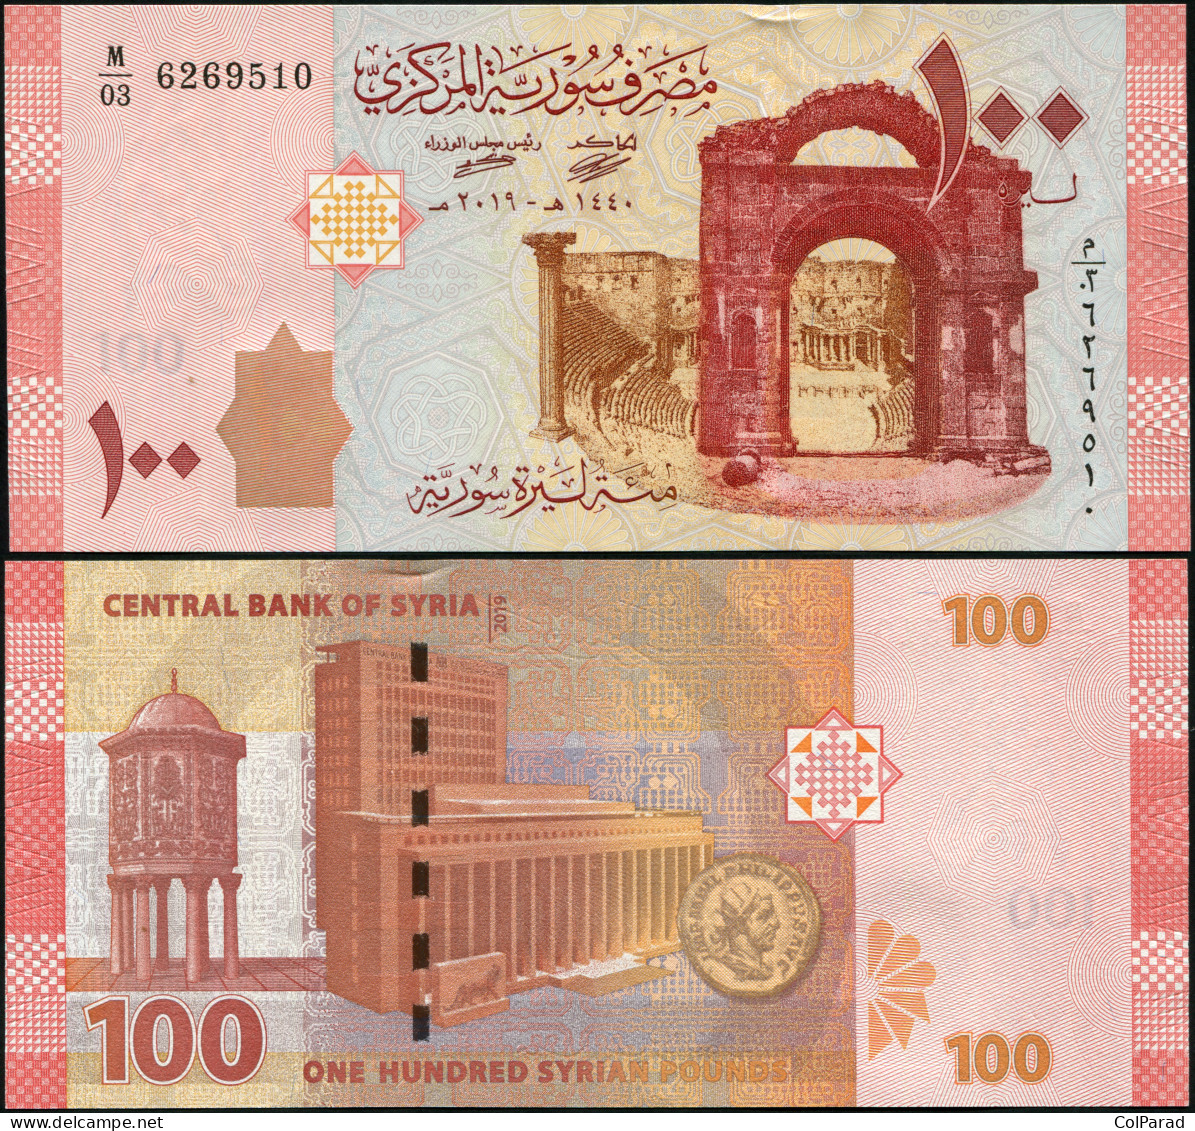 SYRIA 100 SYRIAN POUNDS - 2019 - Paper Unc - P.NL Banknote - Syrie